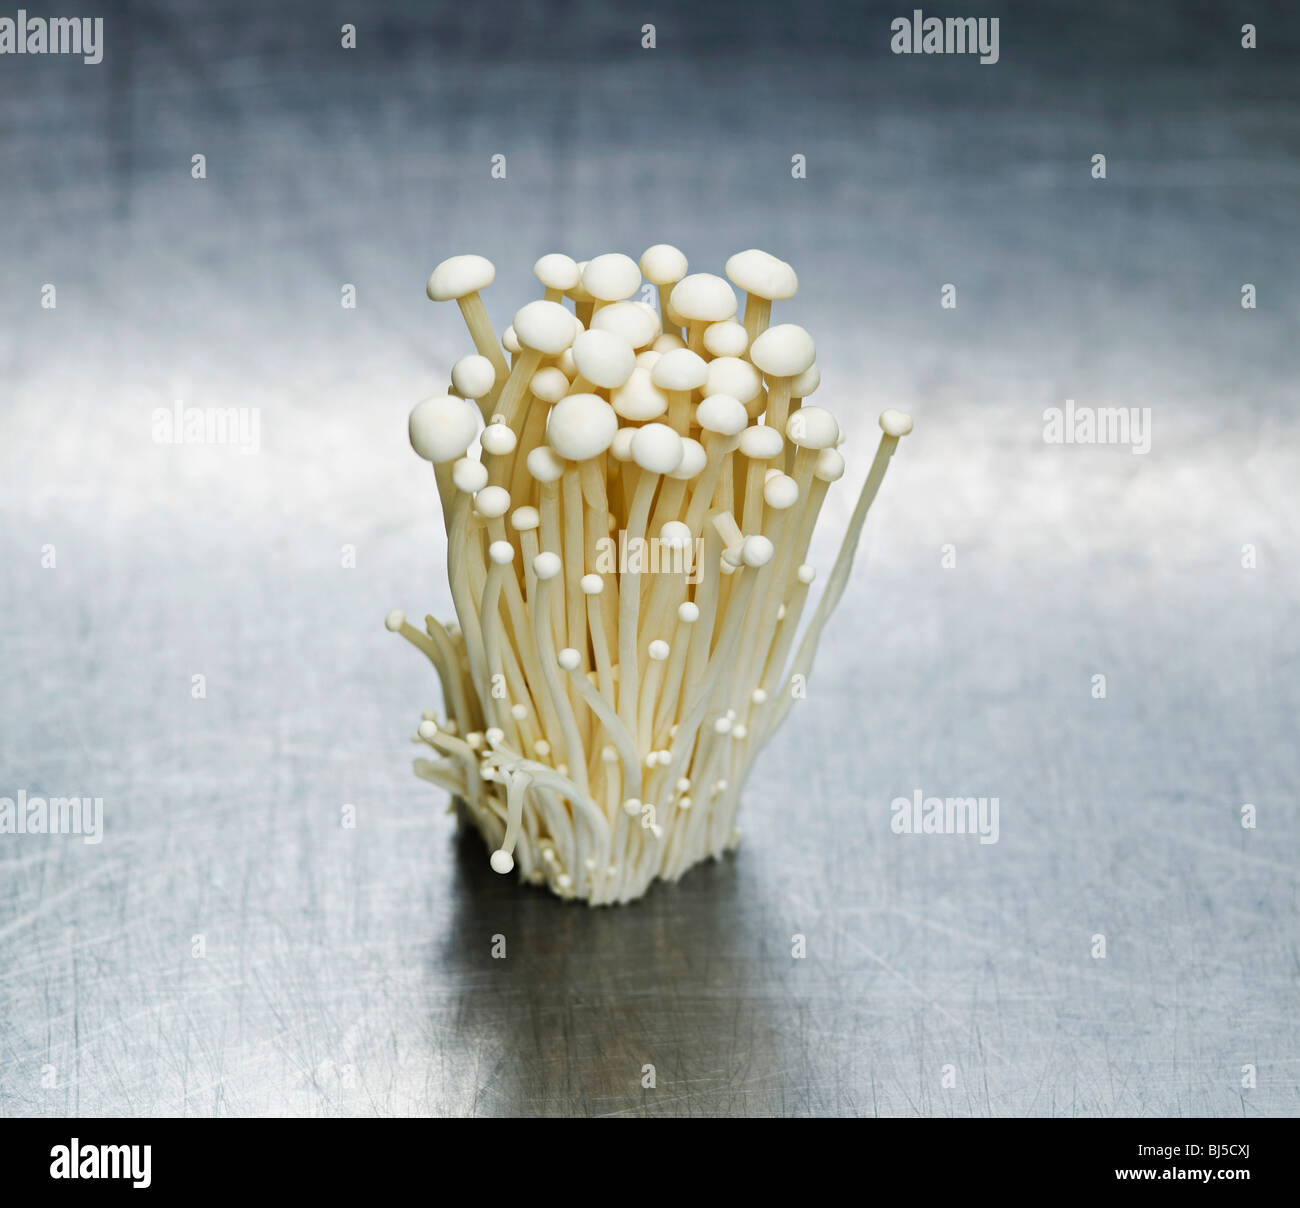 A cluster of white mushrooms Stock Photo